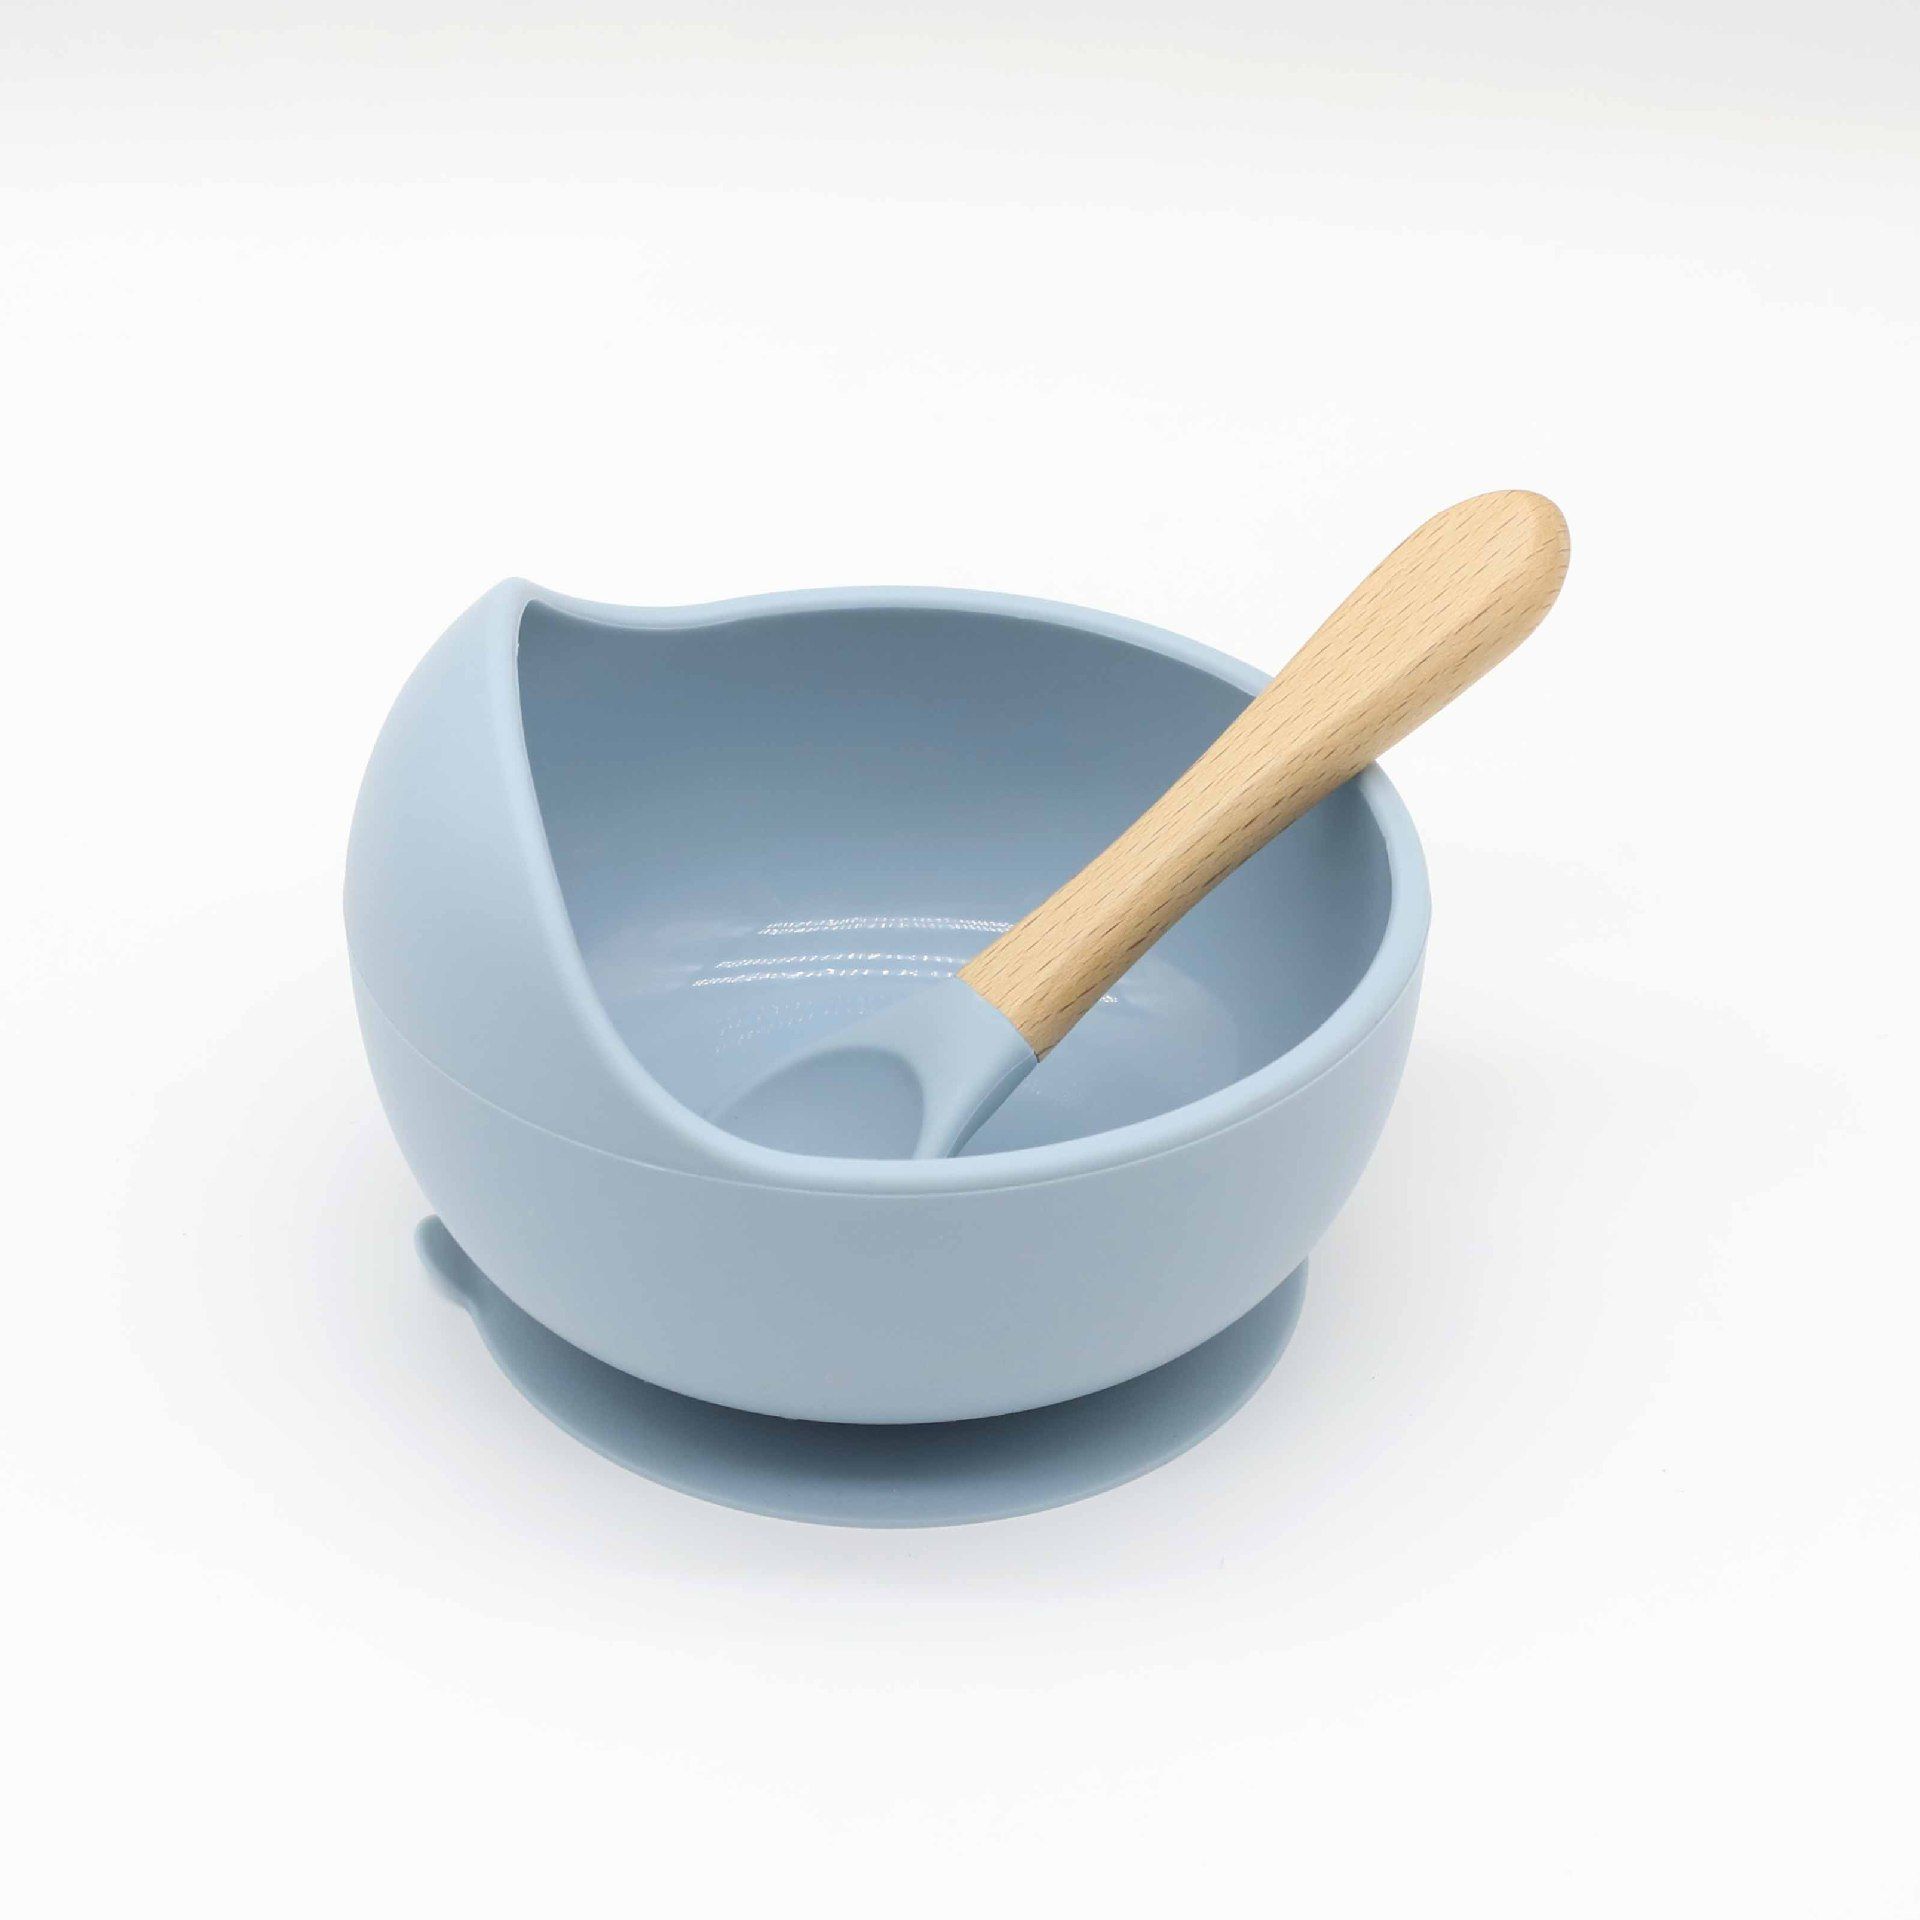 2Pcs Baby Silicone Suction Bowl and Spoon with Wood Handle Baby Toddler Tableware Dishes Self-Feedin